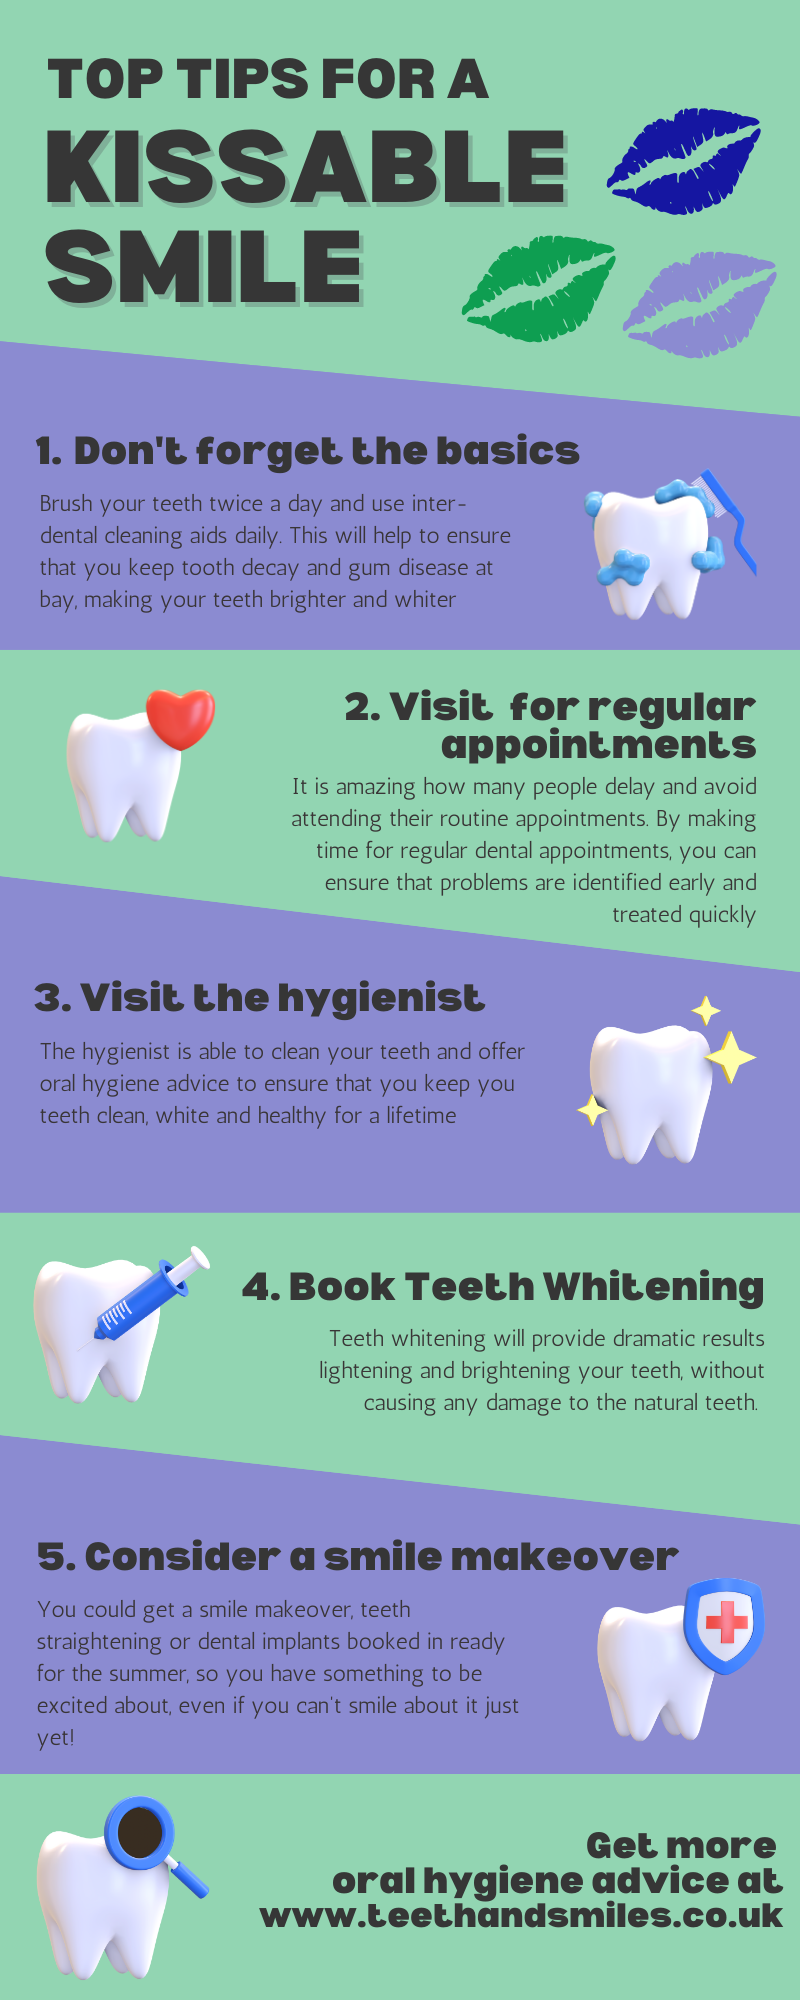 Top tips for a kissable smile - Teeth & Smiles